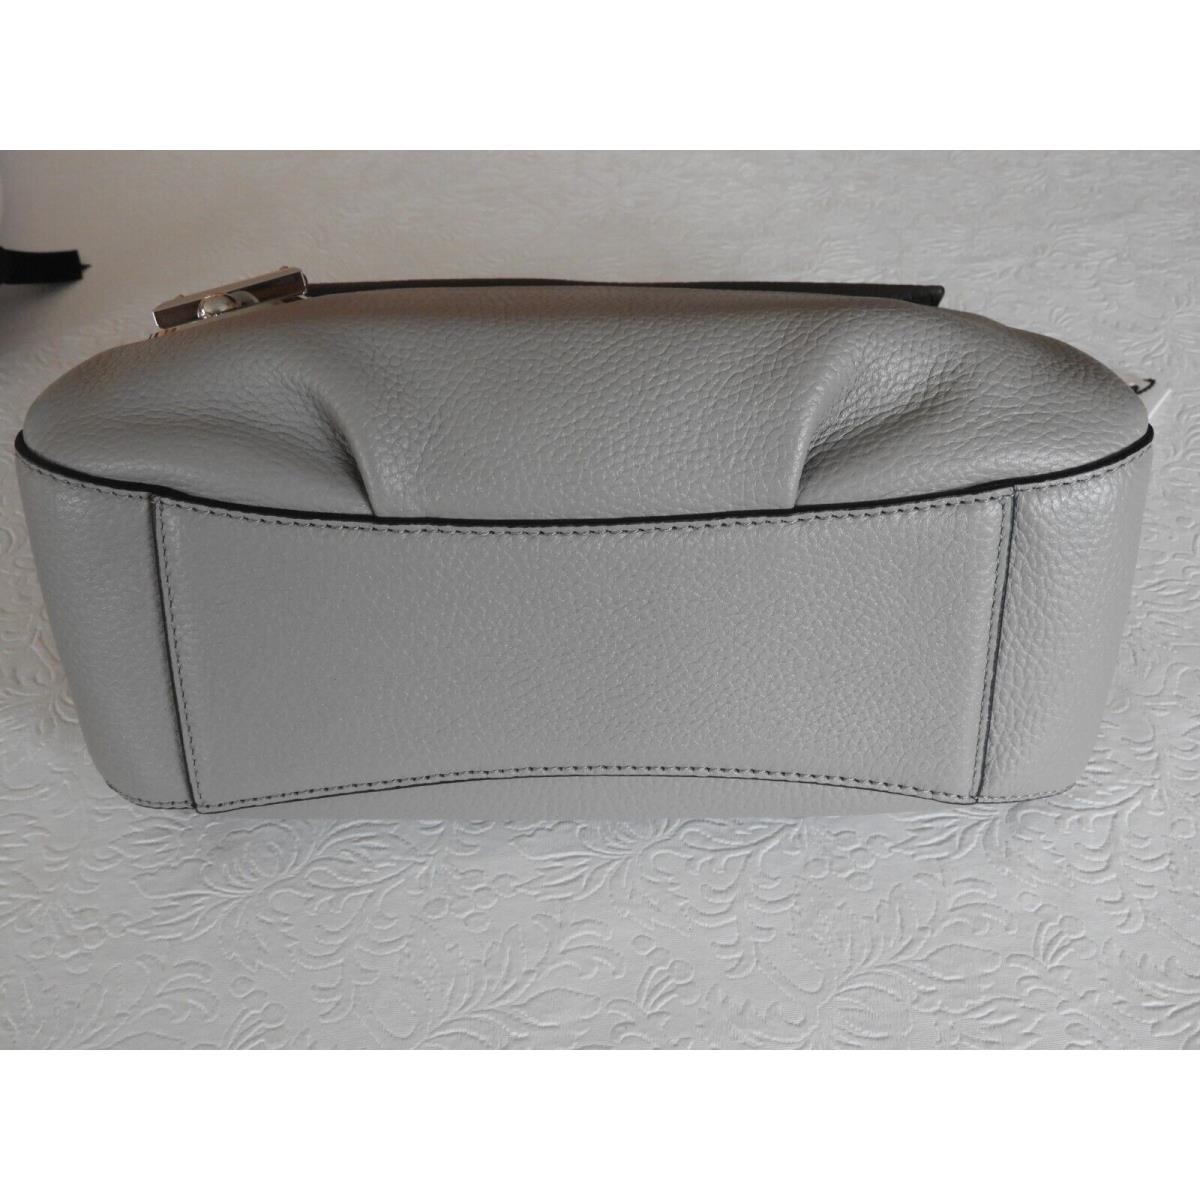 Marc Jacobs  bag   - Gray Handle/Strap, Silver Hardware, Black Lining 12